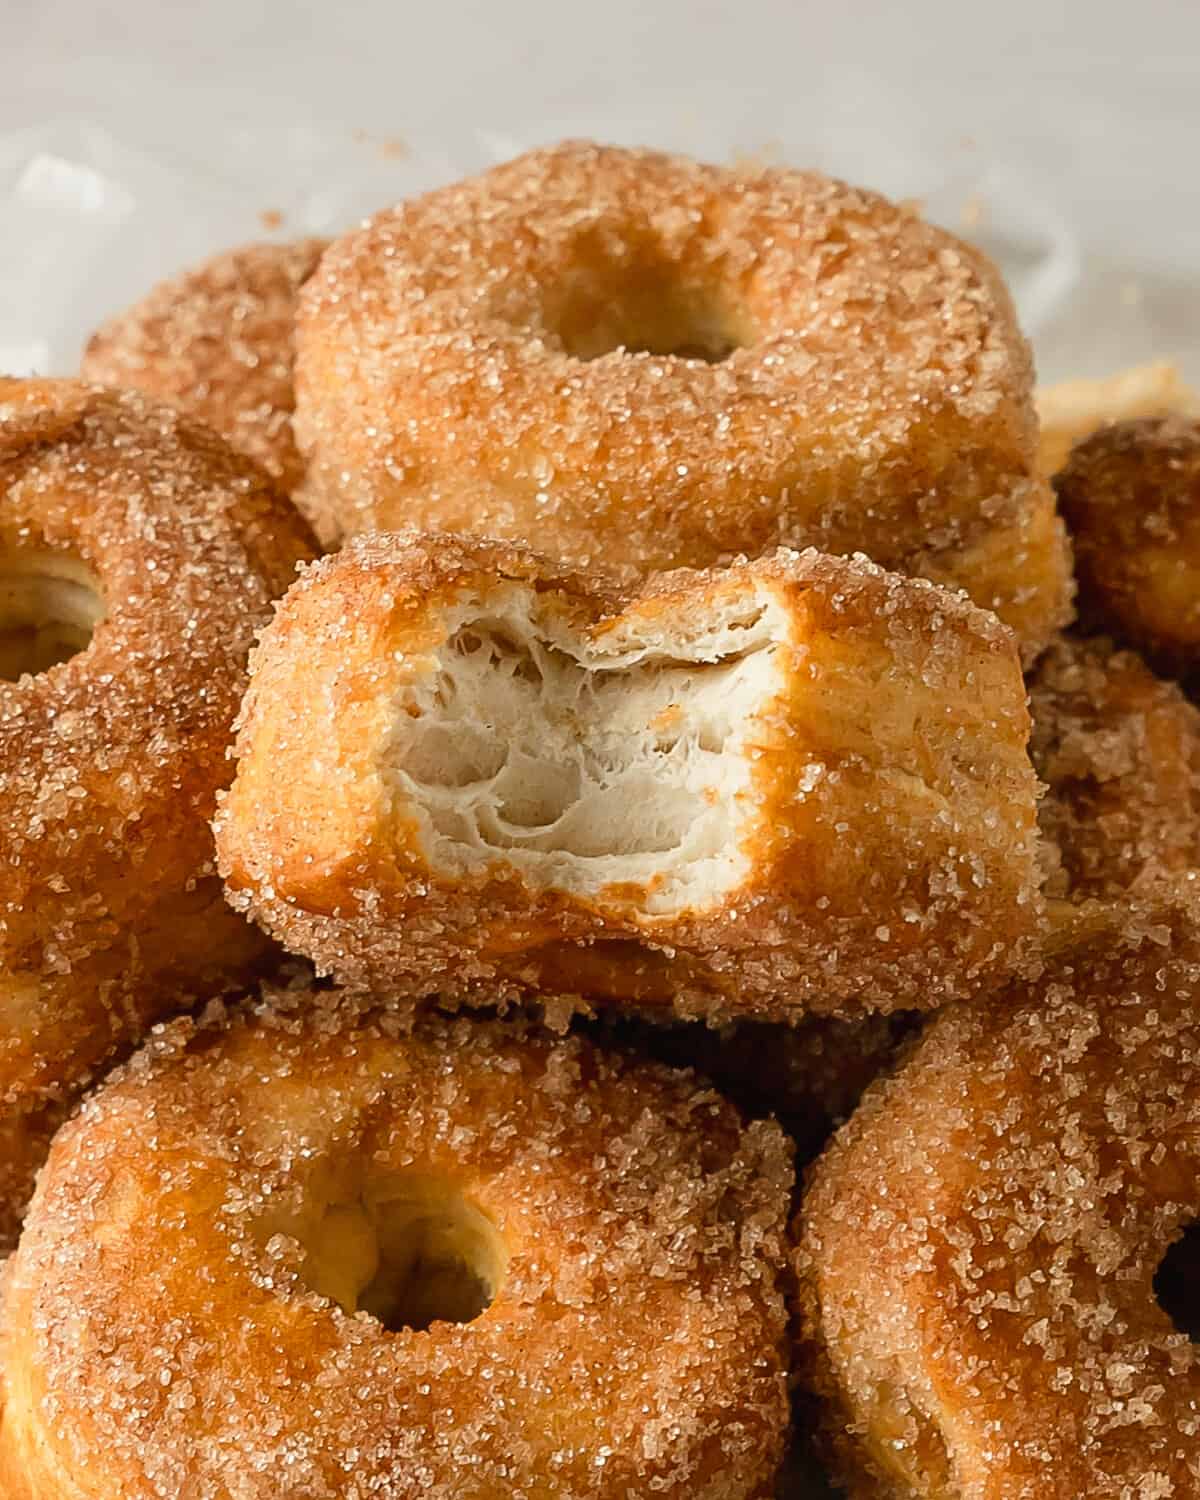 Air fryer biscuit donuts are flaky and fluffy air fryer donuts made using store bought, refrigerated biscuit dough. These easy to make biscuit doughnuts are dipped in melted butter and covered in a sweet and crunchy cinnamon sugar coating. Prep and air fryer these cinnamon sugar biscuit donuts in under 10 minutes. 